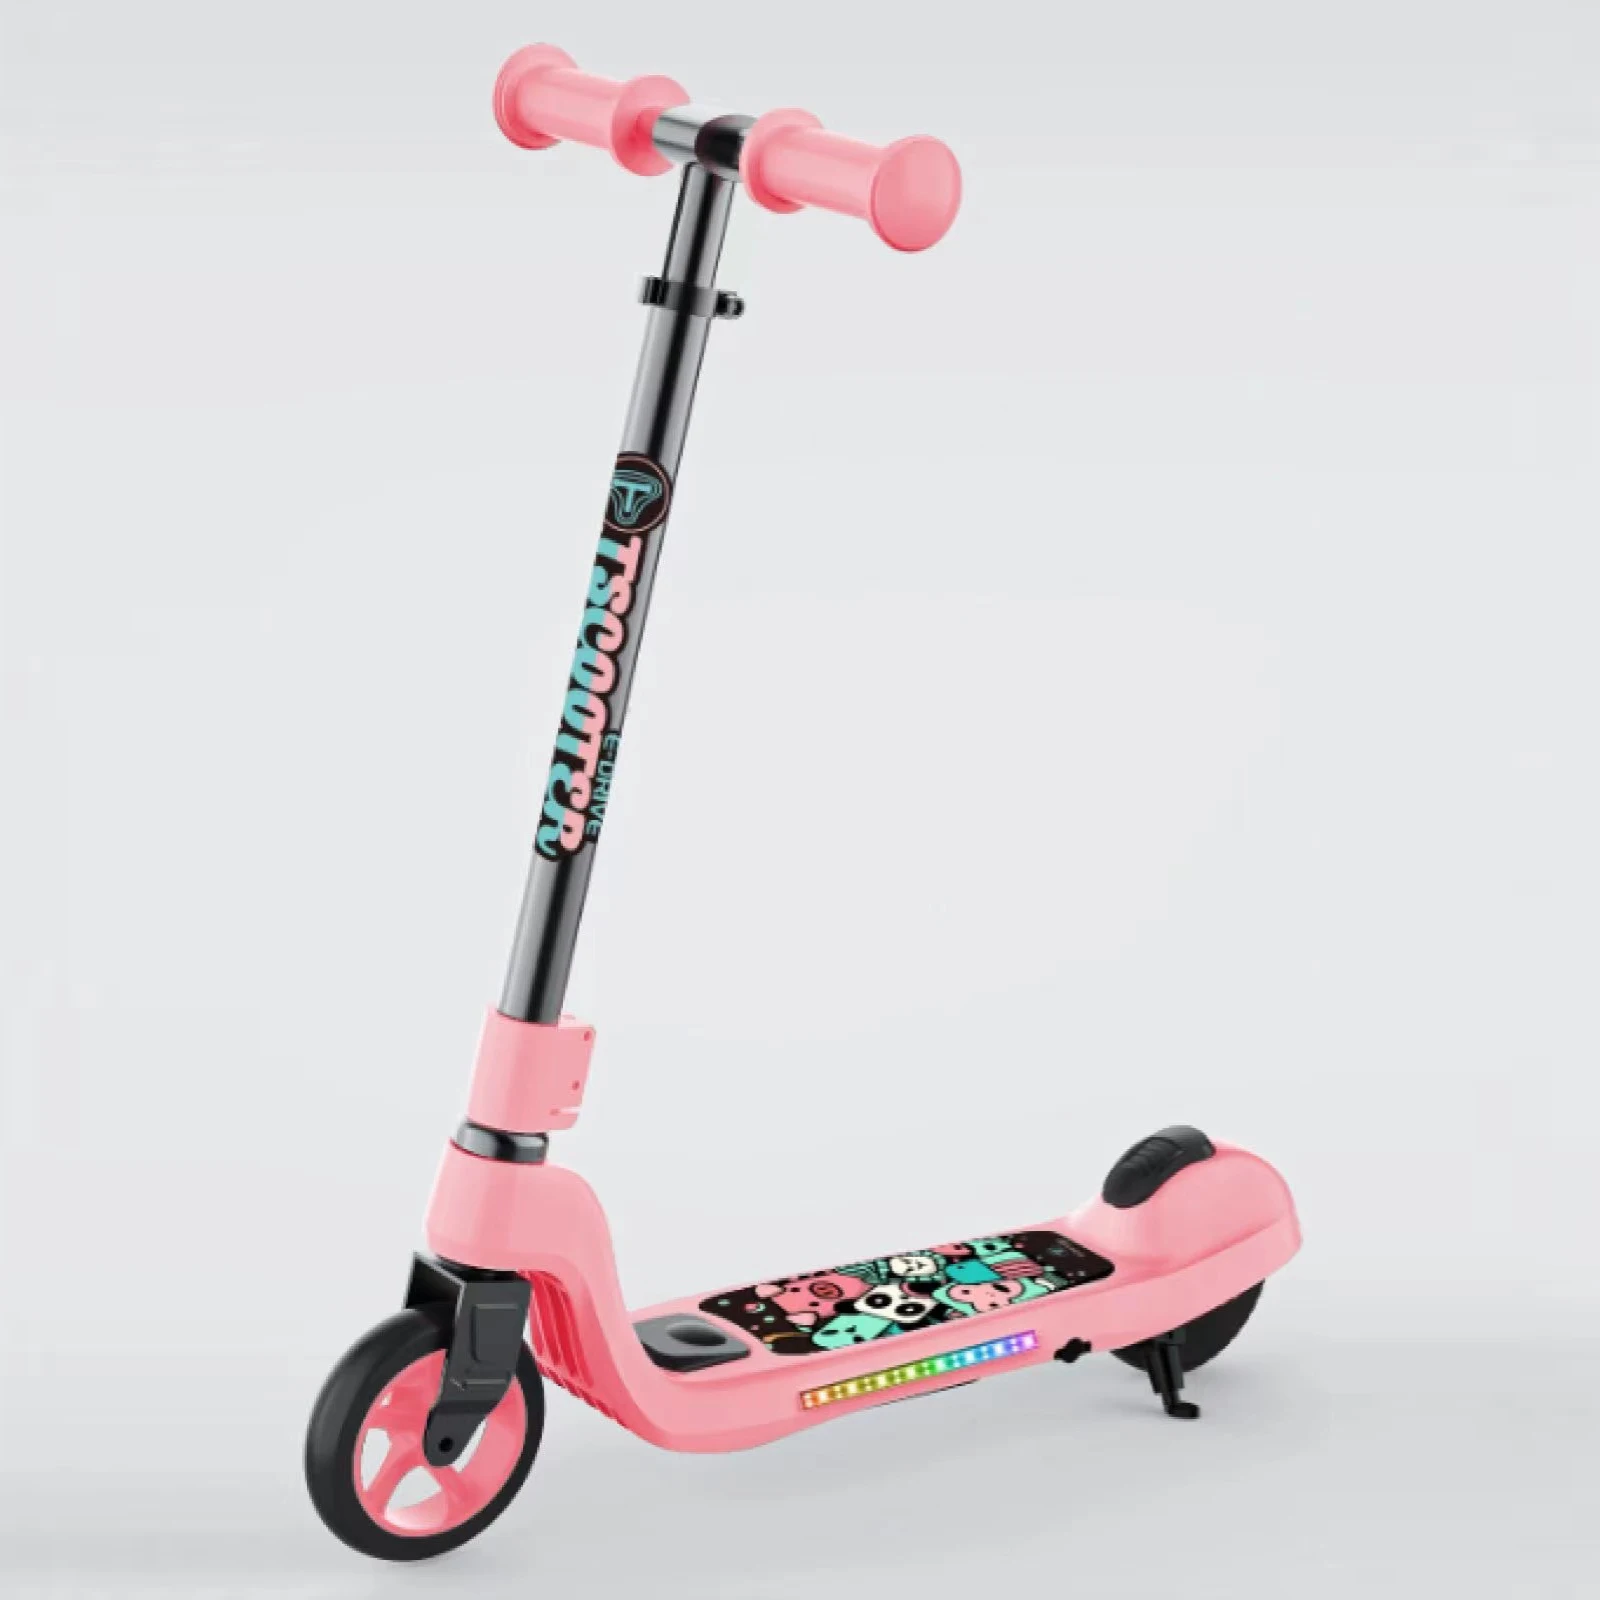 Source Kids Electric Scooter 2022 Newest Design private Model 2 Wheels 120W brushless motor 24V 2.2Ah battery on